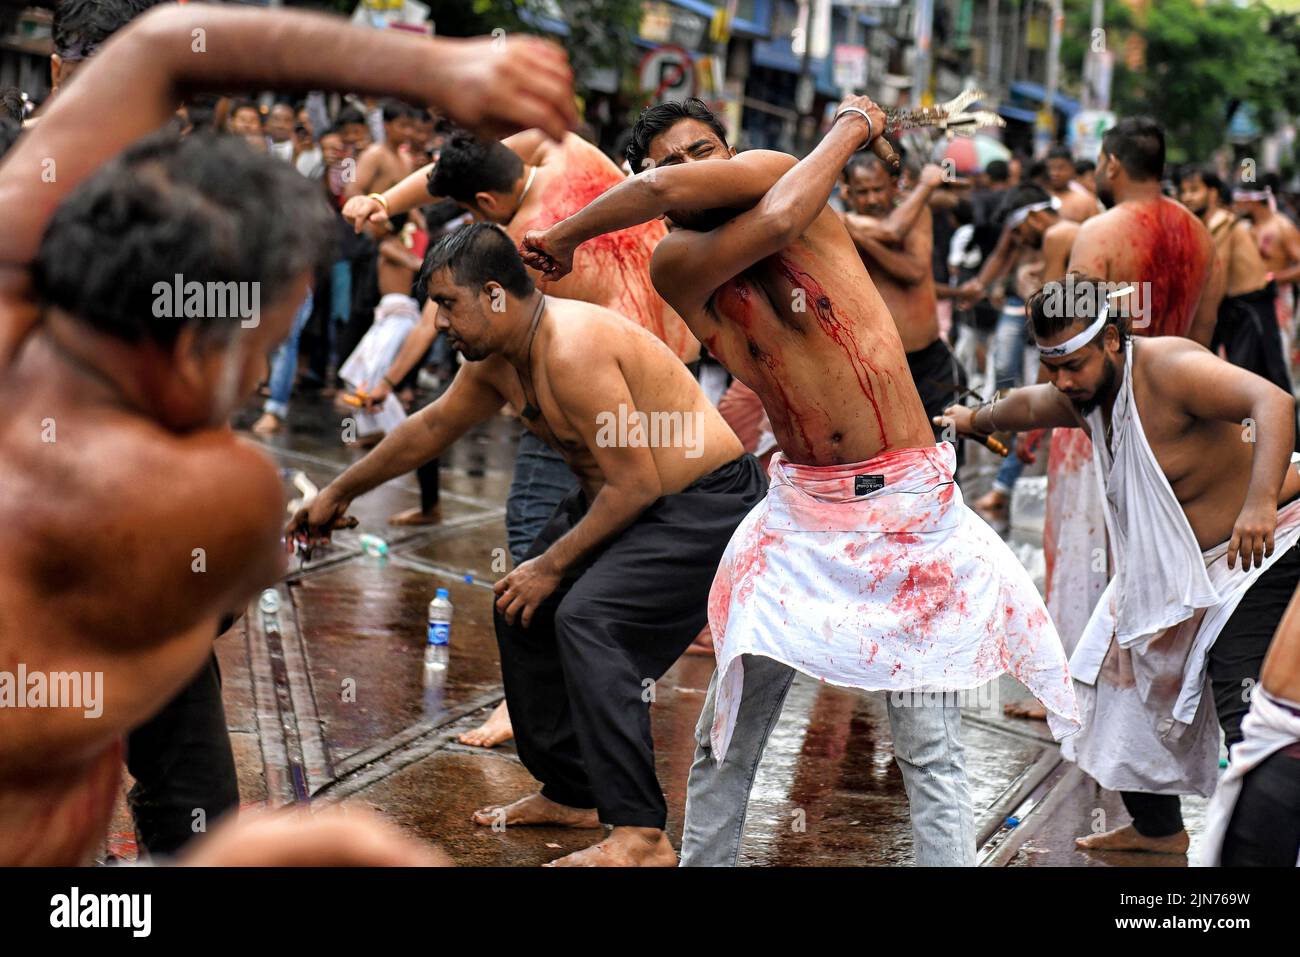 (EDITORS NOTE: Image contains graphic content.) Shi'ite Muslims covered in blood beat their chests and heads with blades during the Muharram procession of Kolkata. Muharram is the first month of the Islamic calendar & Ashura is the tenth day of the month of Muharram on which the commemoration of the martyrdom of Imam Hussain, the grandson of Prophet Muhammad (PBUH), during the battle of Karbala, is done. It is part of Mourning for Shia Muslims and a day of fasting for Sunni Muslims that is observed all over the World. Stock Photo